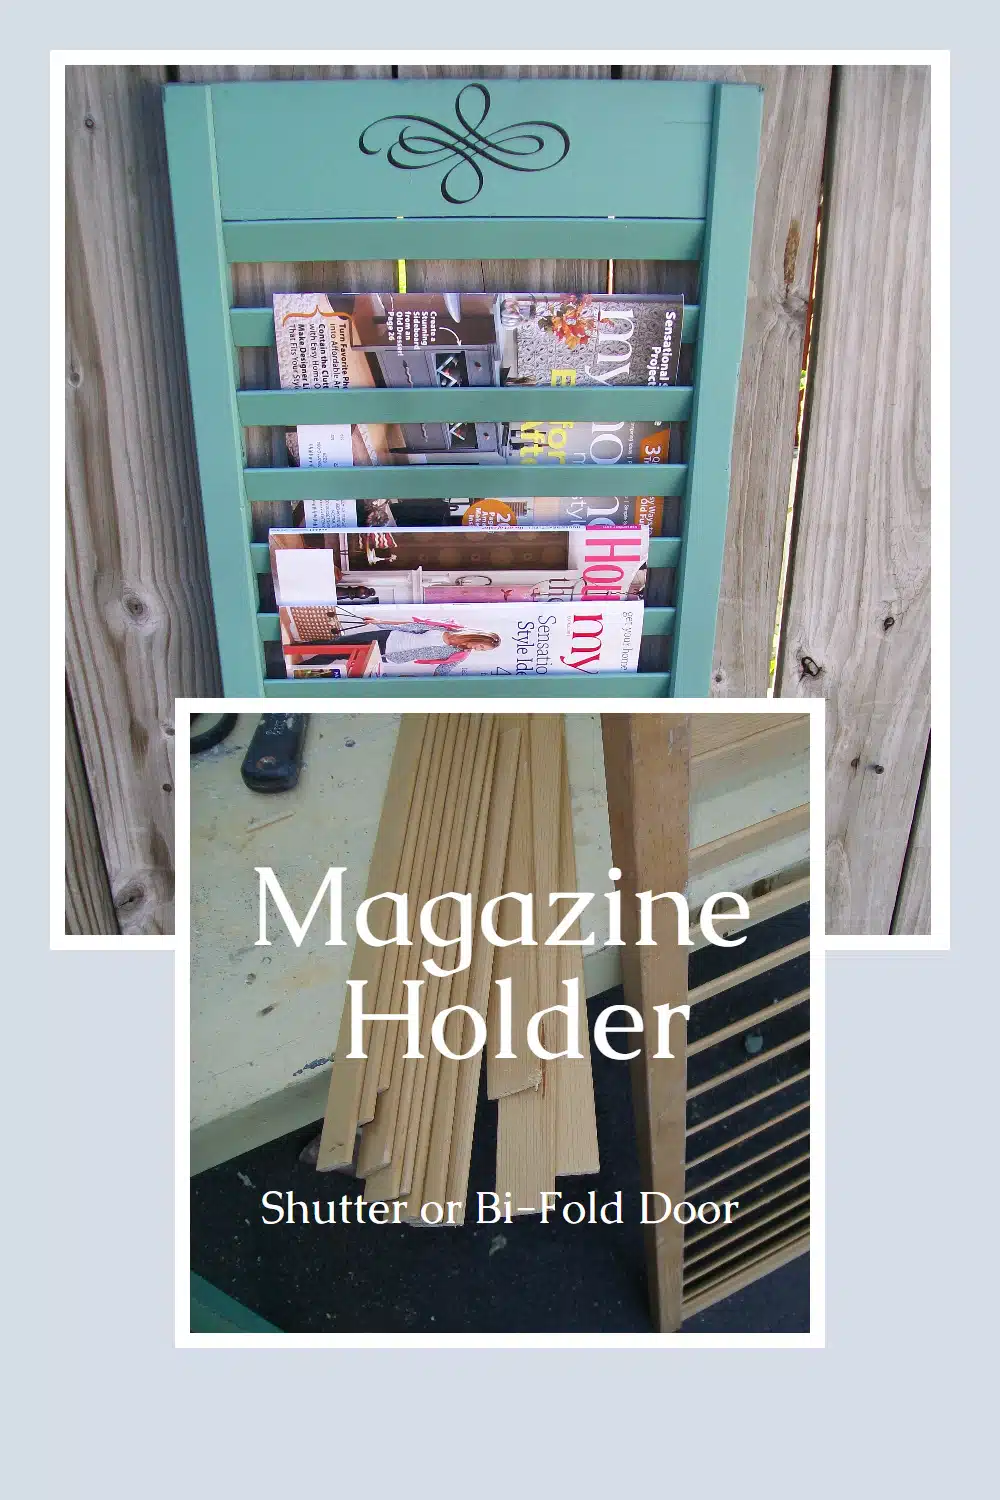 Easy repurposed shutter project uses part of a bi-fold door with every other slat removed to make a shutter magazine rack. Fun idea to keep you organized. Step by step directions with great tips on removing slats! #MyRepurposedLife #repurposed #upcycle #shutter via @repurposedlife